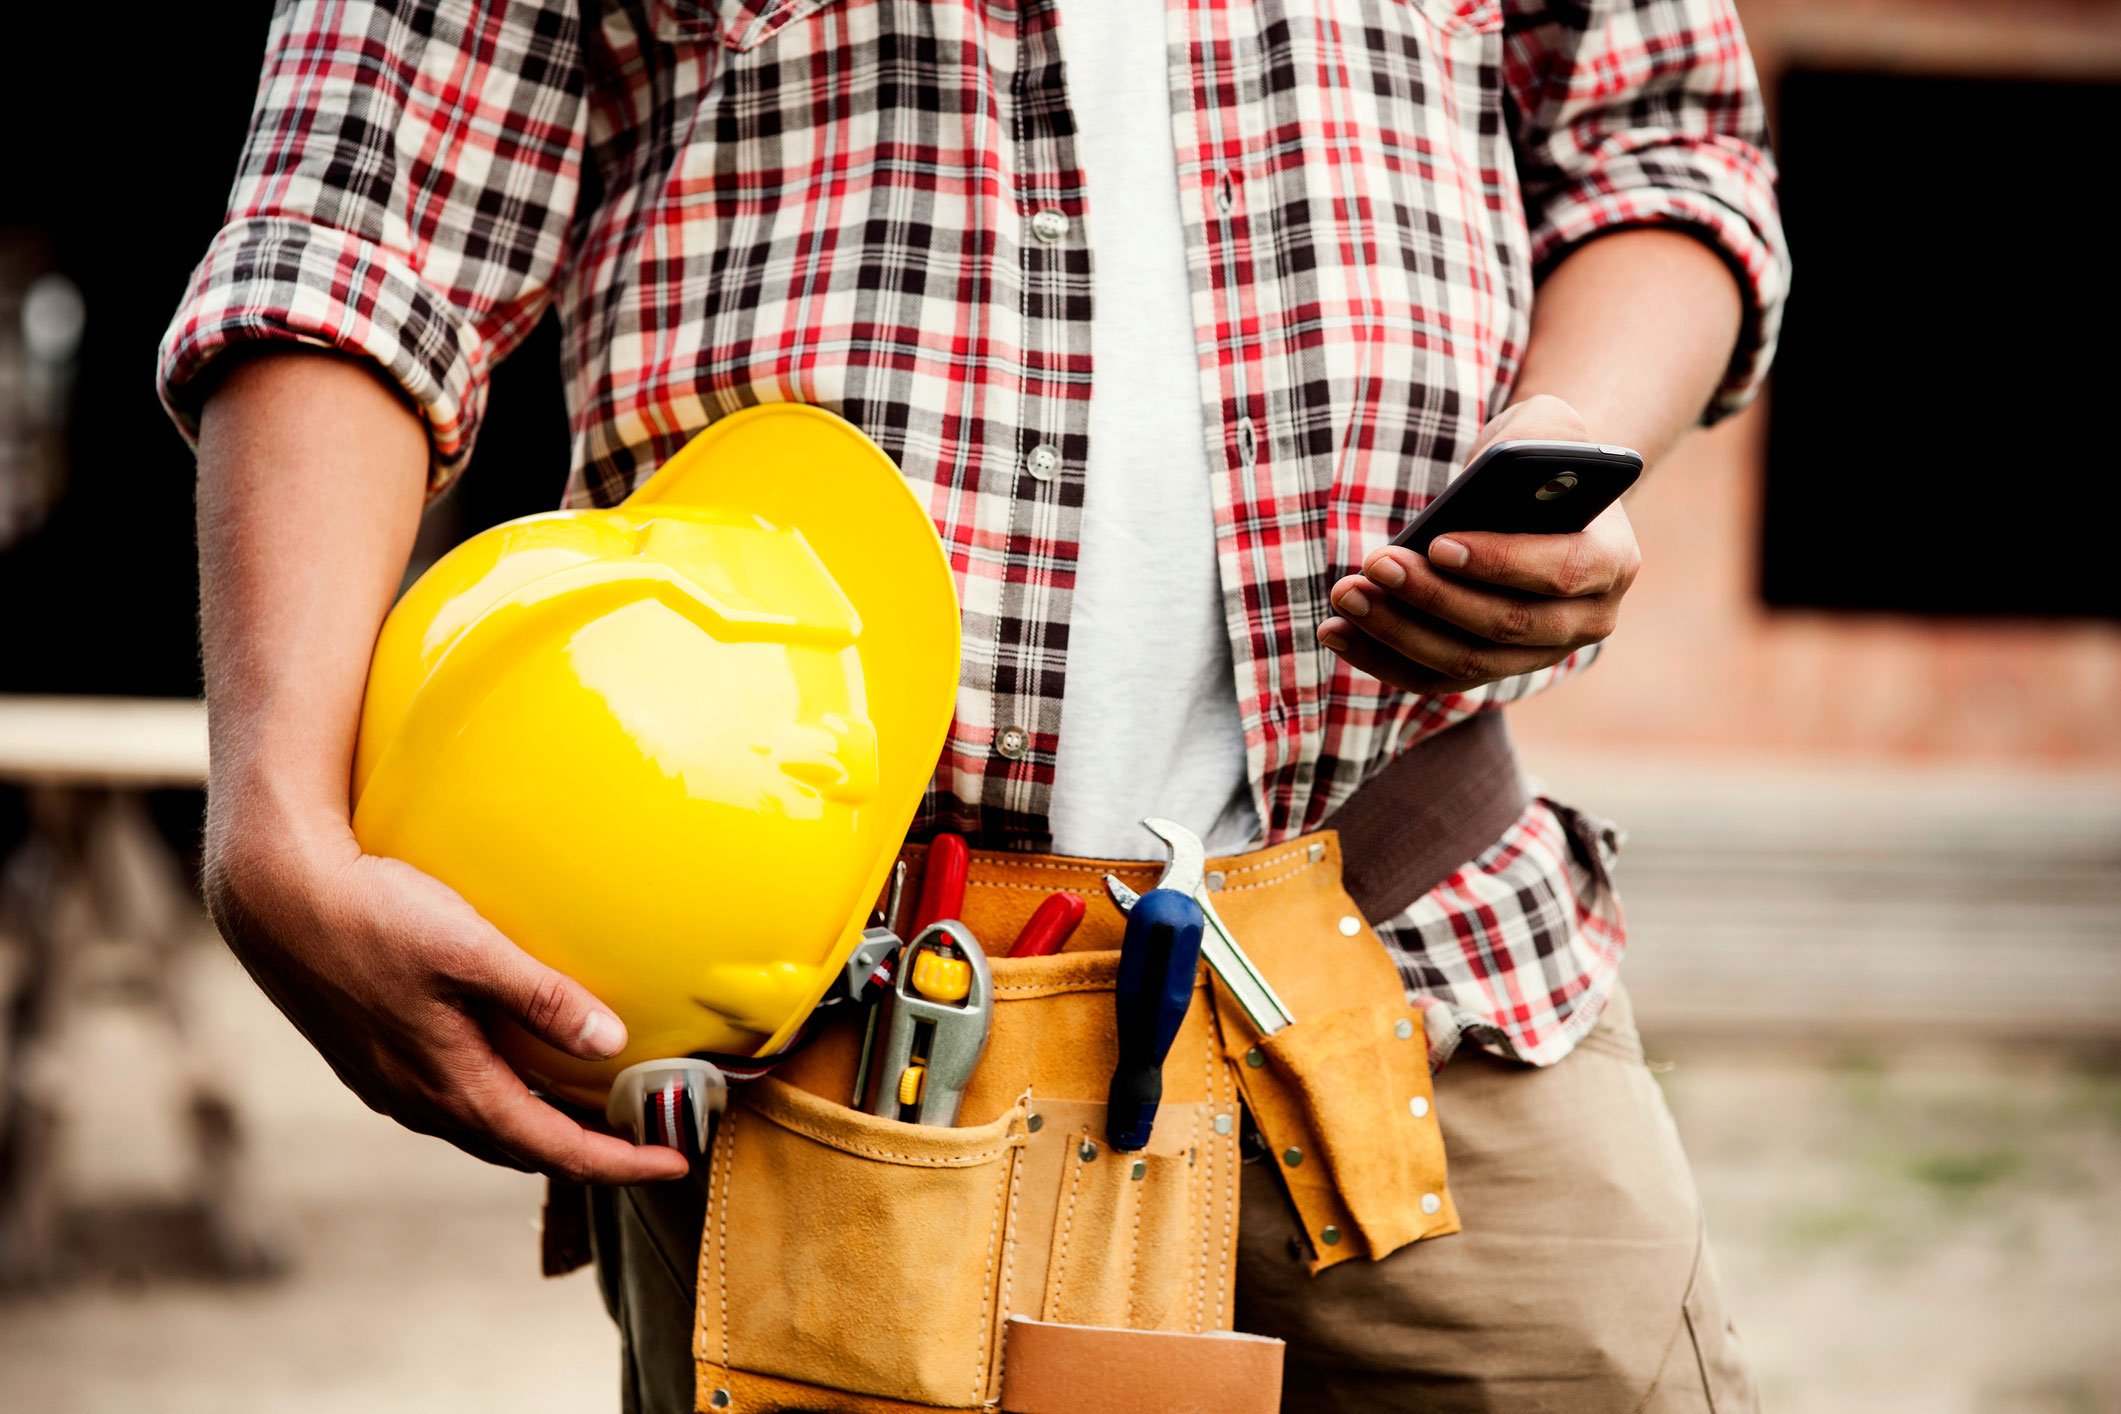 A contractor views smartphone while holding yellow hard hat in right hand